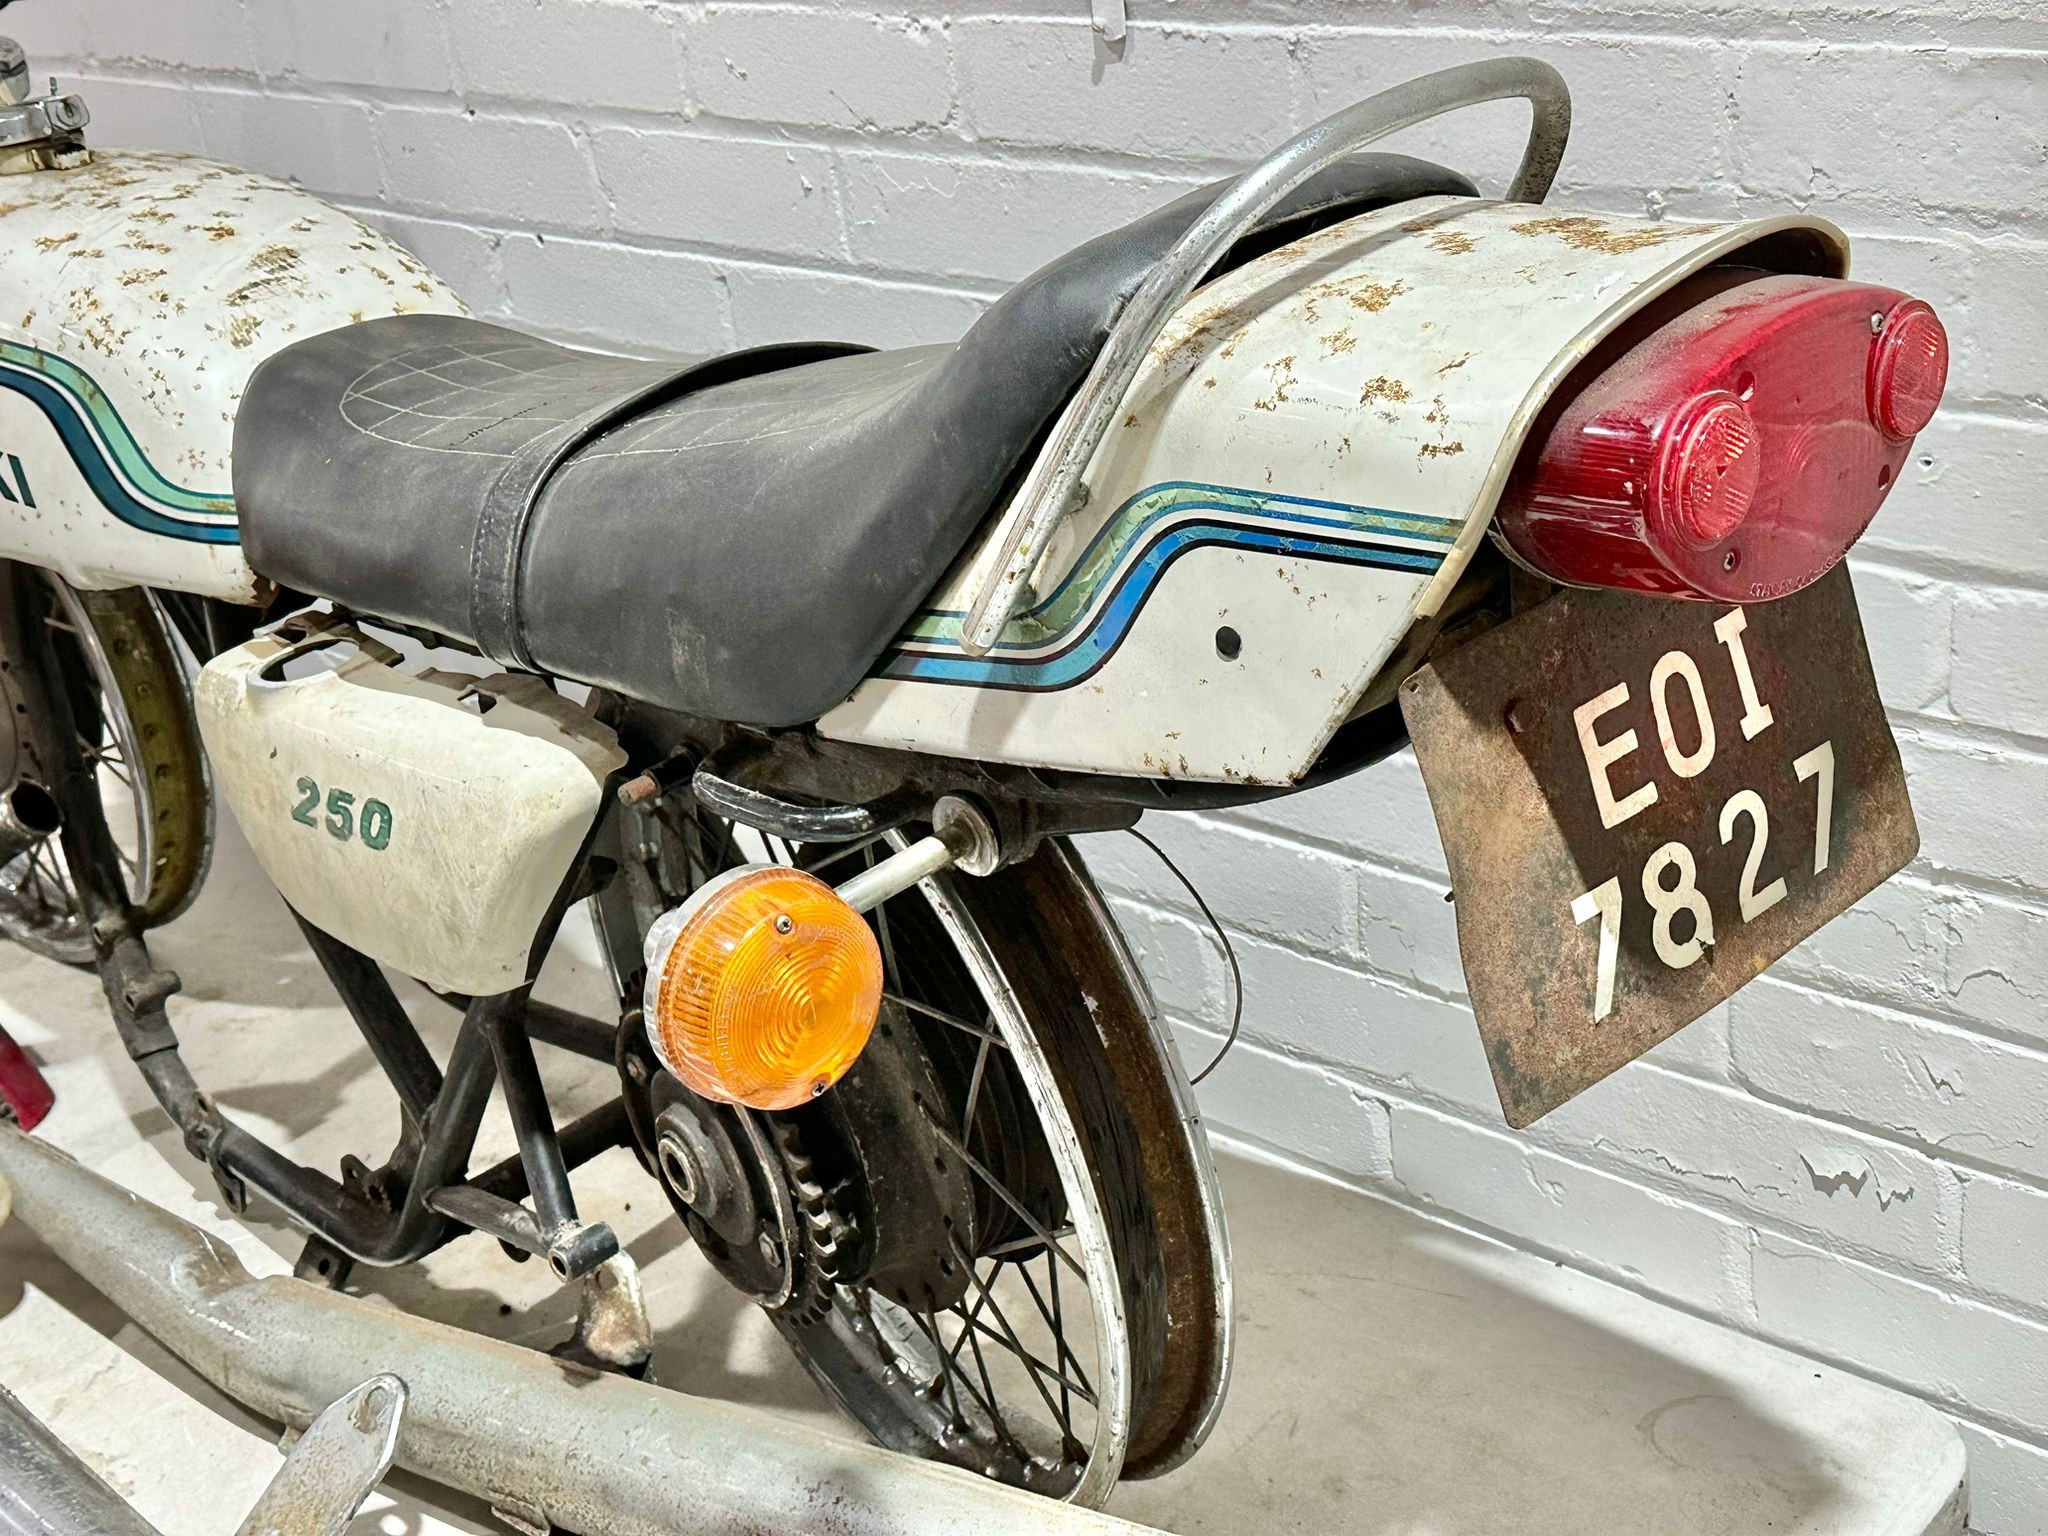 Kawasaki S1 250 White Ghost 2 stroke Frame 1972, with parts, engine and documents - Image 23 of 28